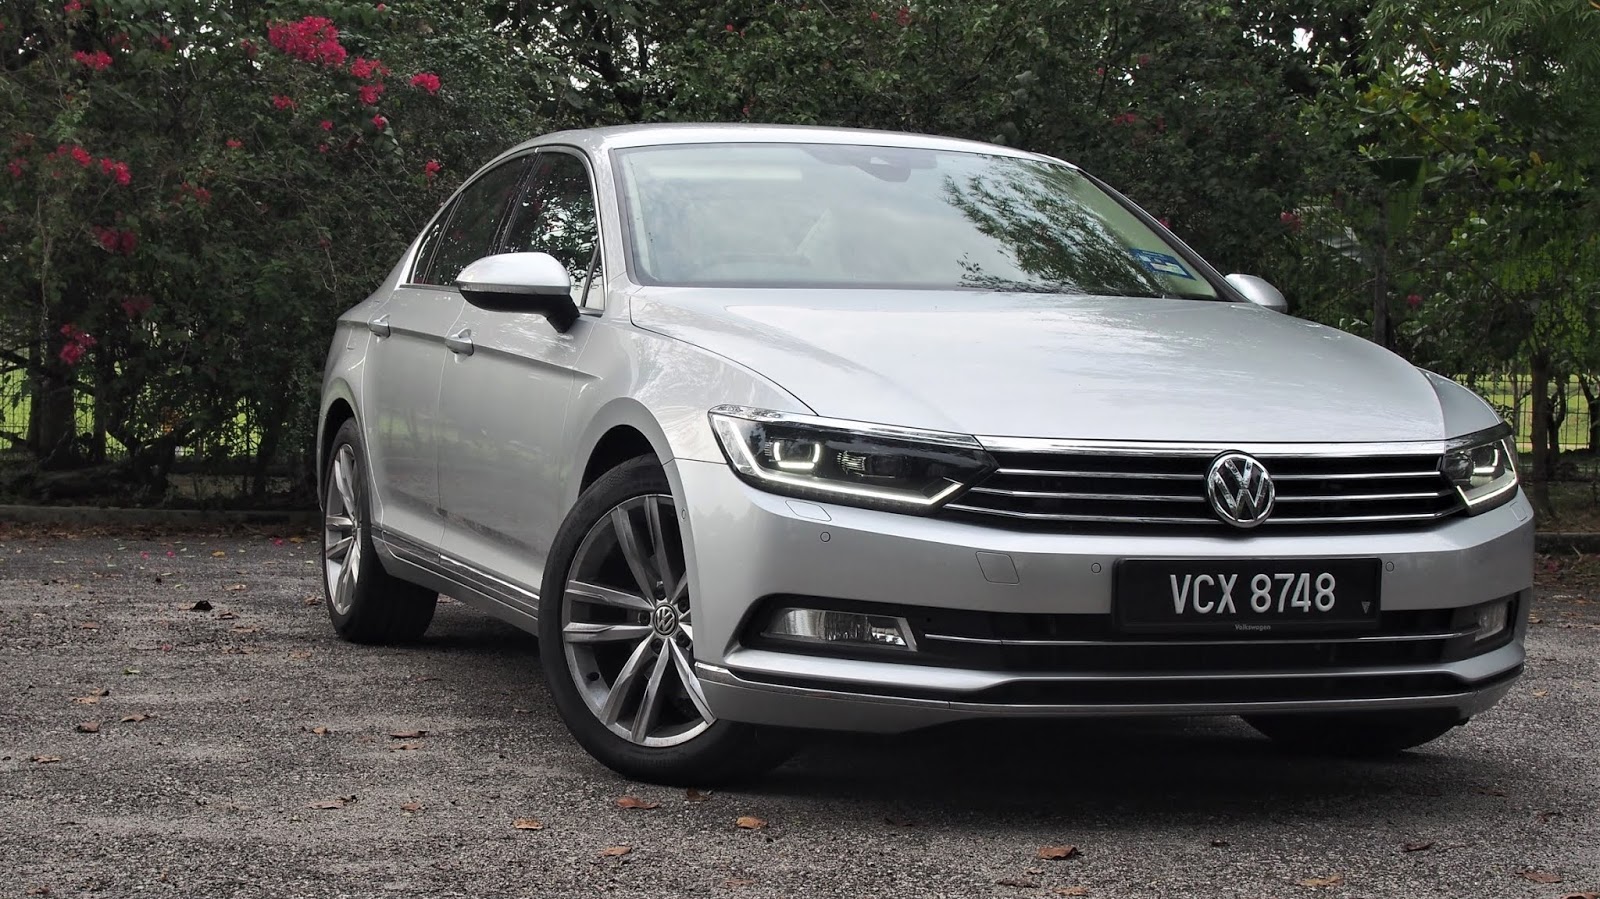 Betsy Trotwood Prehistorisch wond Motoring-Malaysia: 2019 Volkswagen Passat 2.0 TSI Highline Short Test Drive  - A Look at This Pre-Facelift D Segment Sedan Before the Facelift Variant  is Launched (Details of This Here Also)